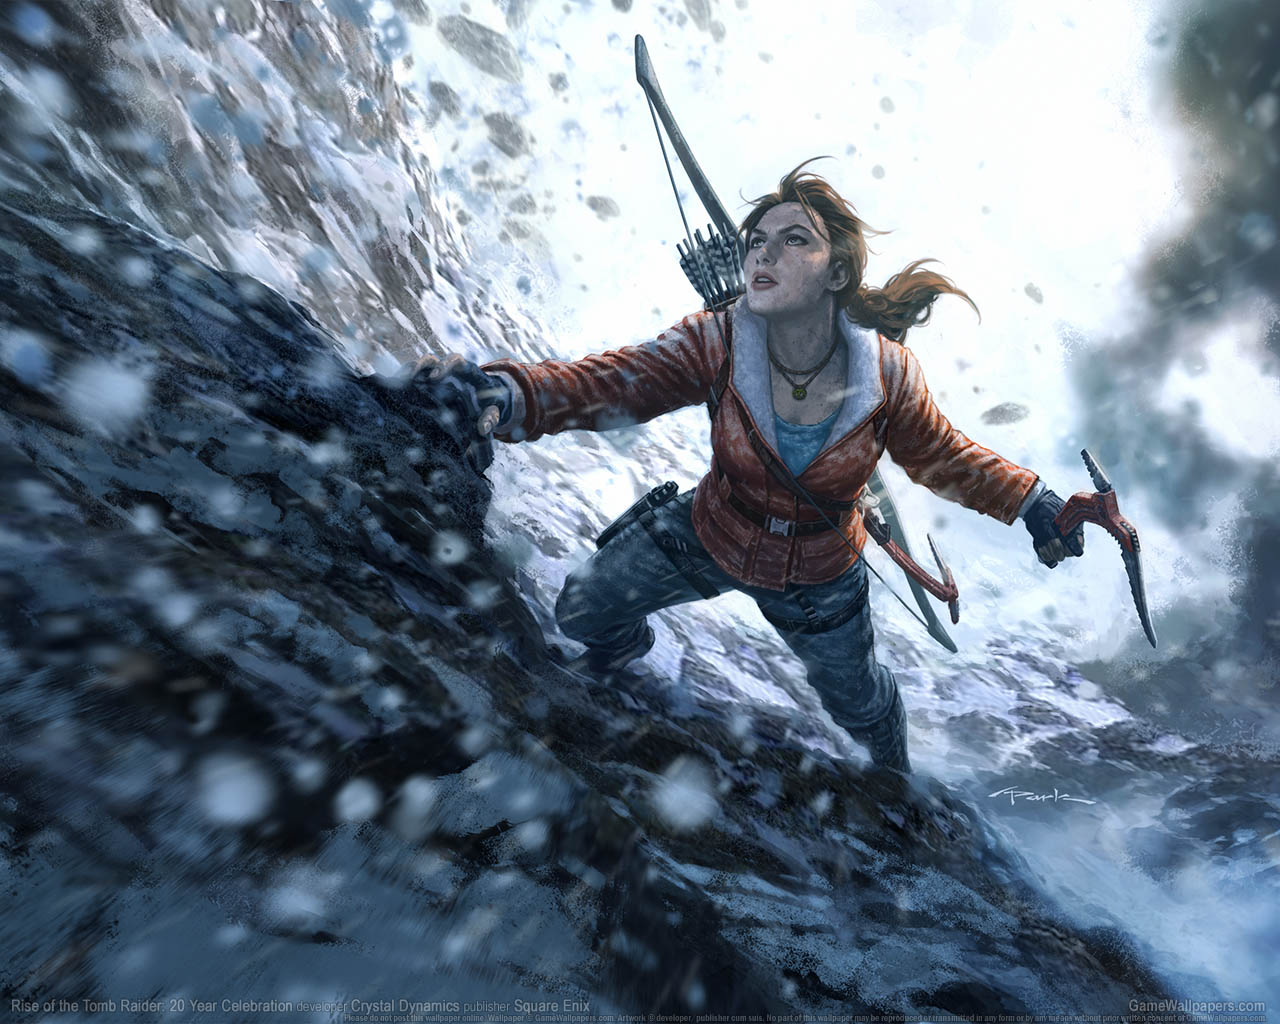 Rise of the Tomb Raider%253A 20 Year Celebration wallpaper 02 1280x1024